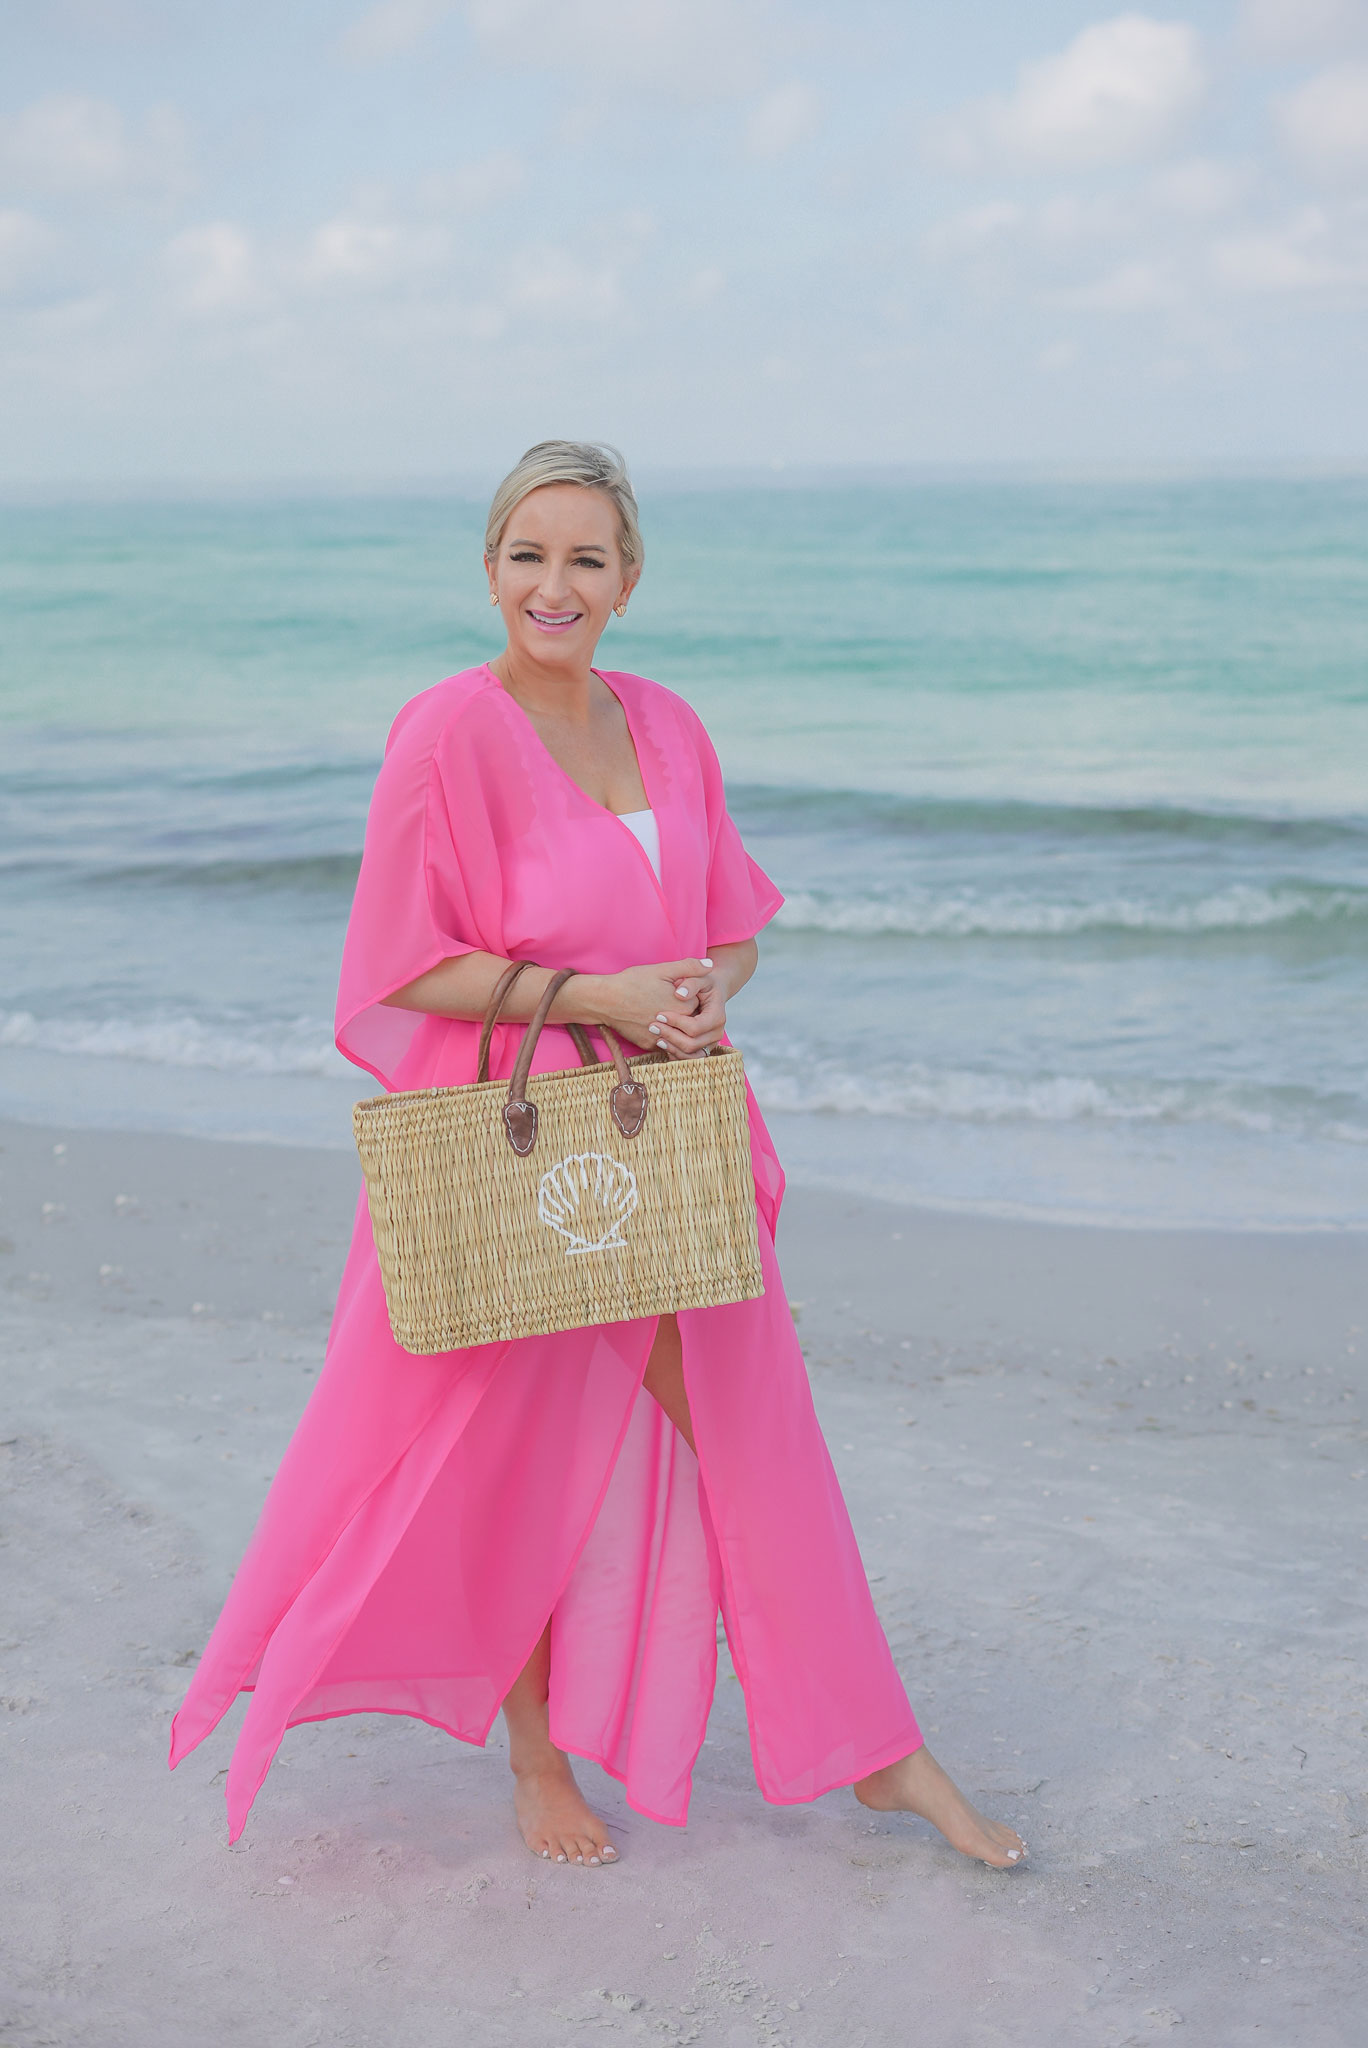 Florida Blogger, Jill DiGioia, The Lovely Flamingo wears gold shell earrings from her new beach earring collection with a hot pink beach coverup maxi kimono over a white ruffle one piece and walking on St. Pete Beach.